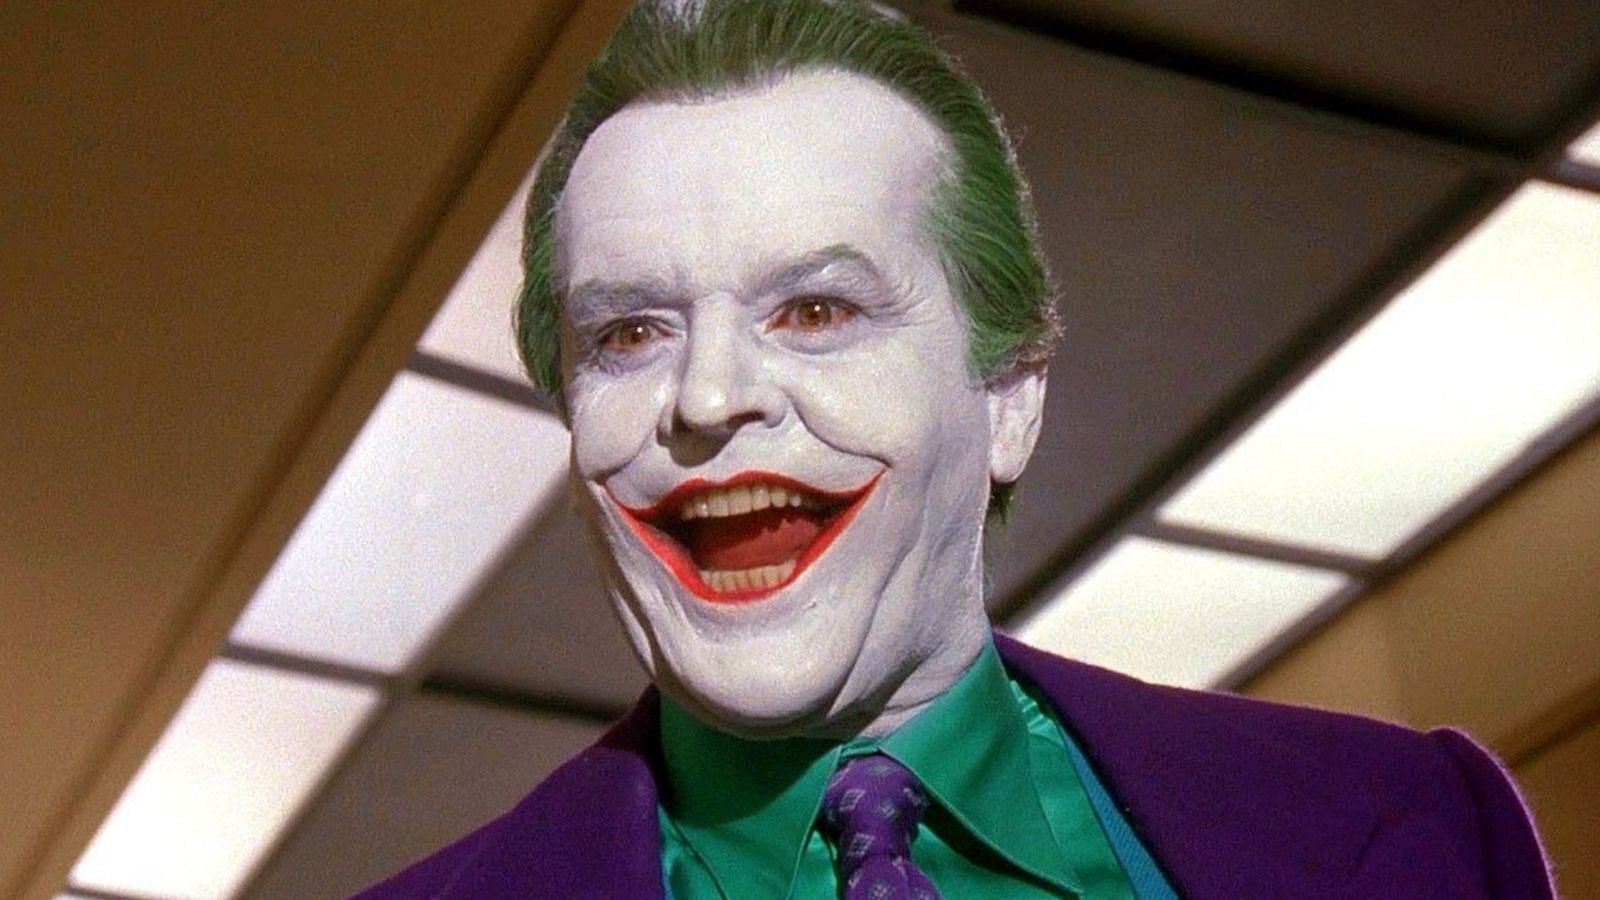 The iconic smile of Jack Nicholson still haunts the minds of fans (Image via Warner Bros)